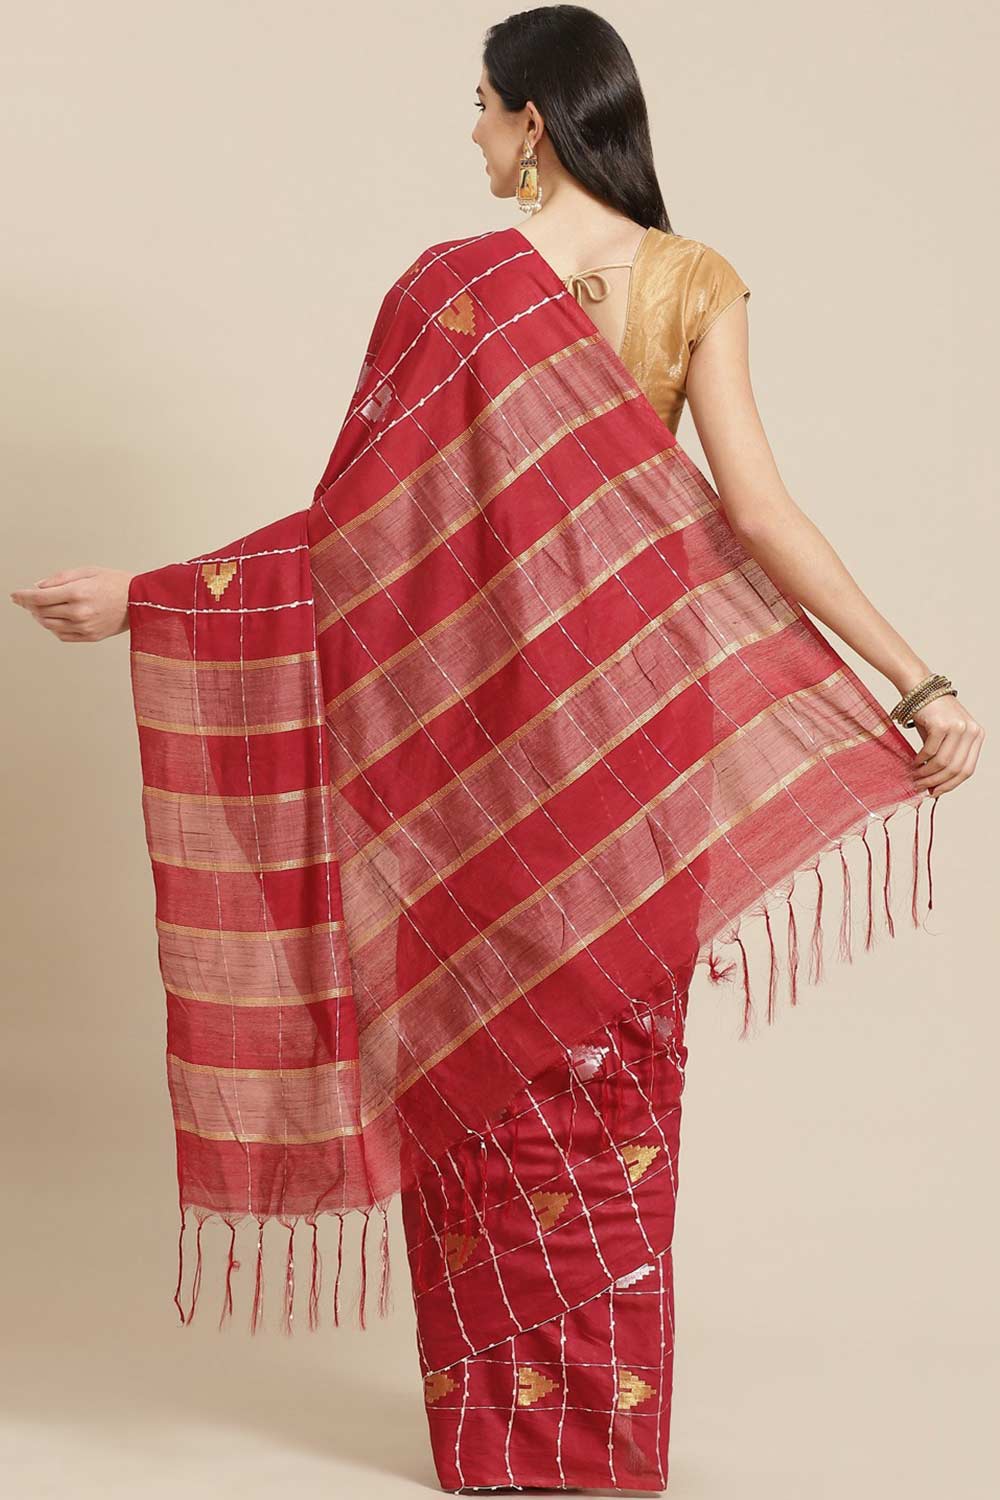 Shop Jenni Burgundy Zari Woven Blended Silk One Minute Saree at best offer at our  Store - One Minute Saree